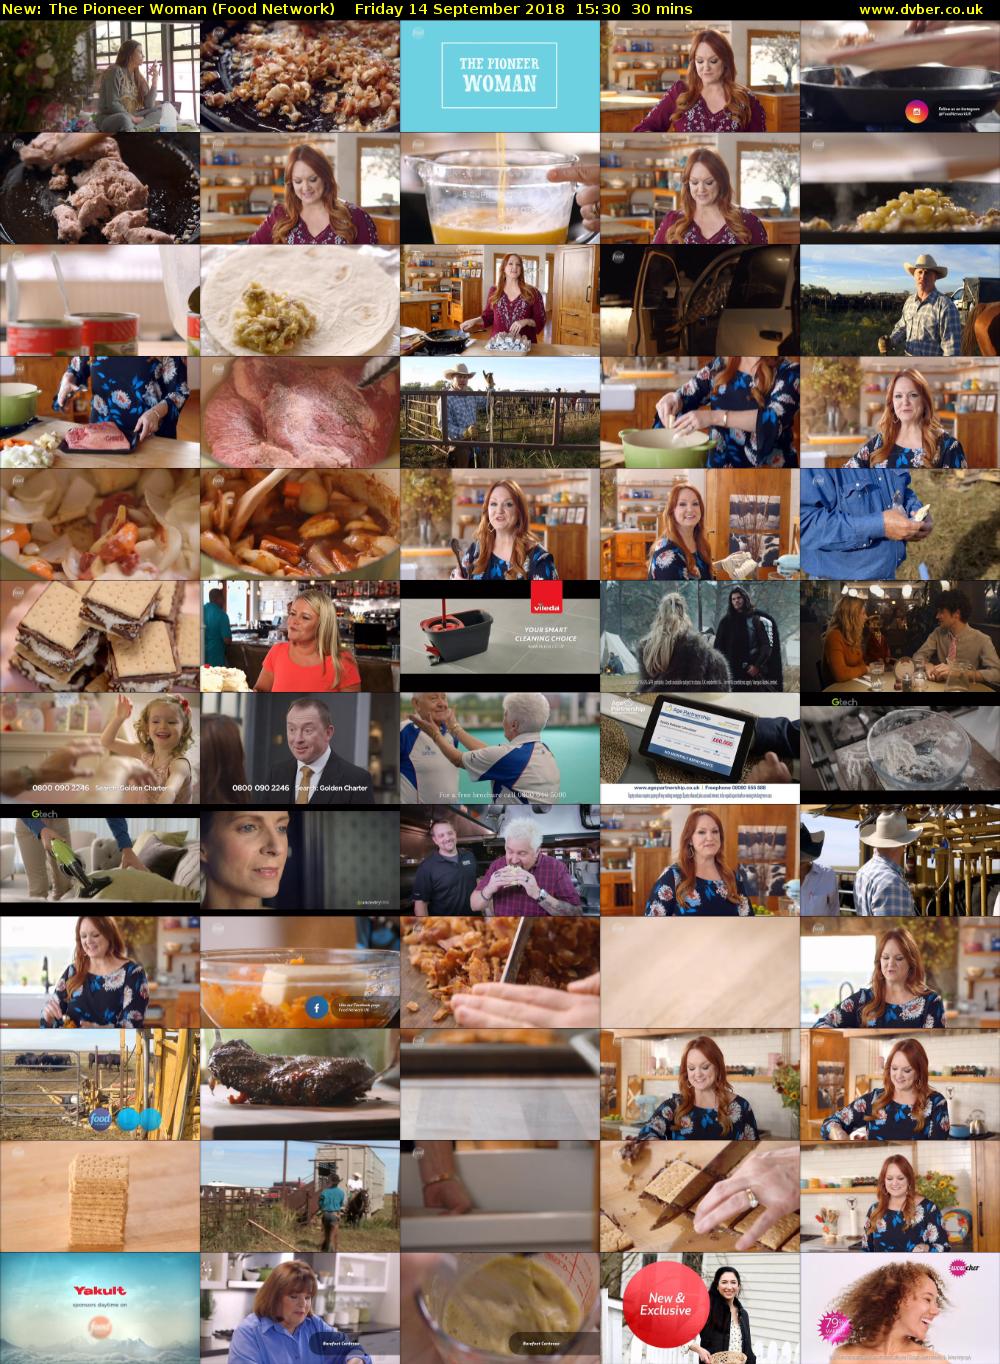 The Pioneer Woman (Food Network) Friday 14 September 2018 15:30 - 16:00